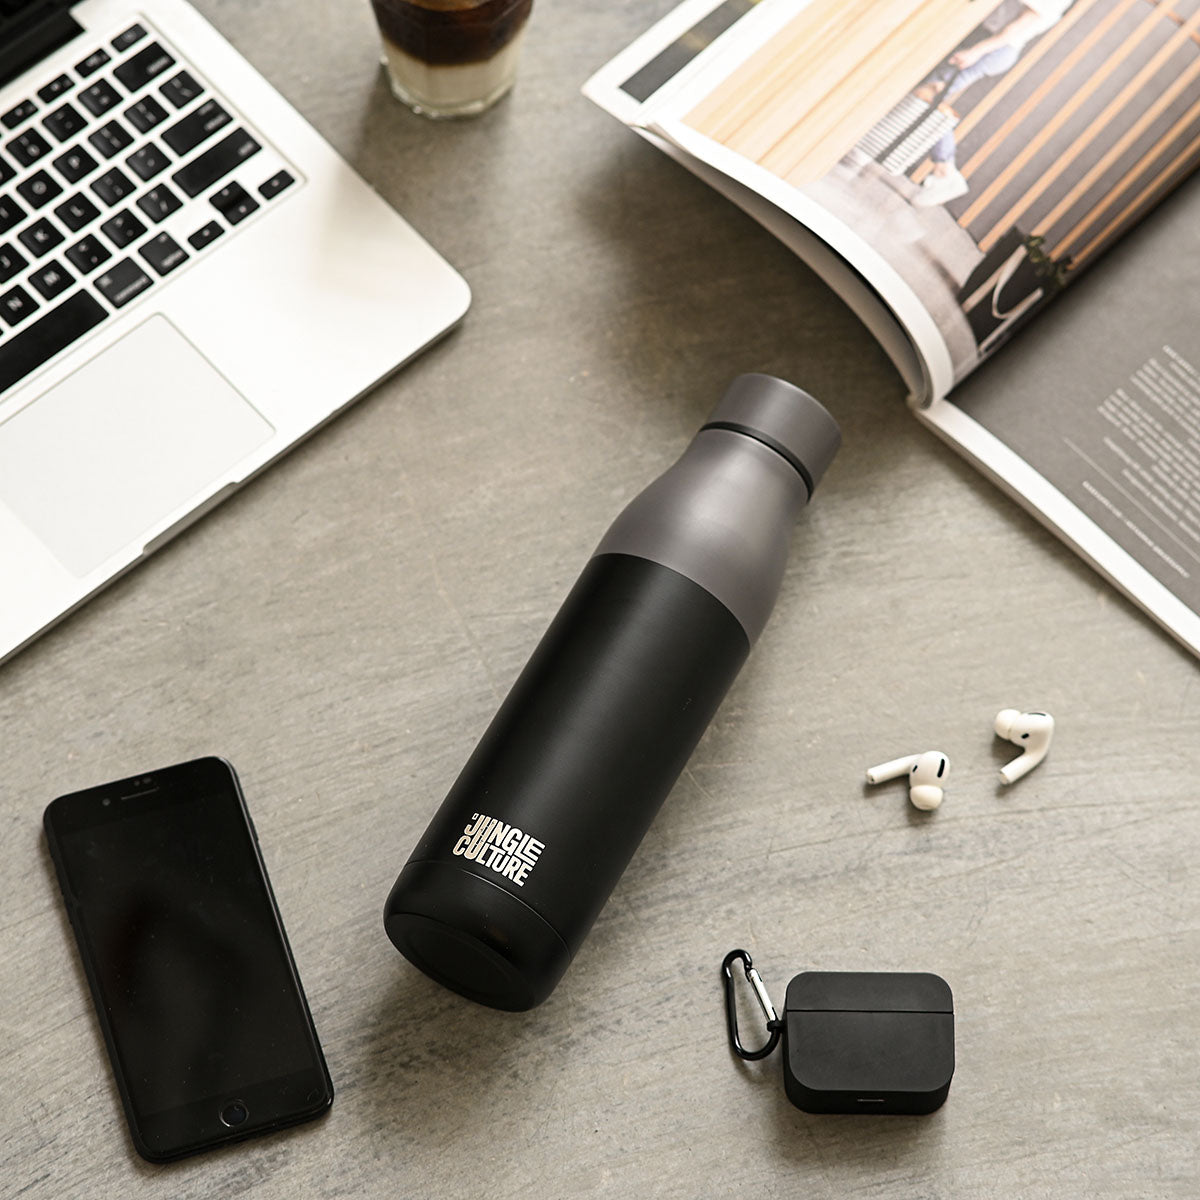 Sustainable Stainless Steel Water Bottle